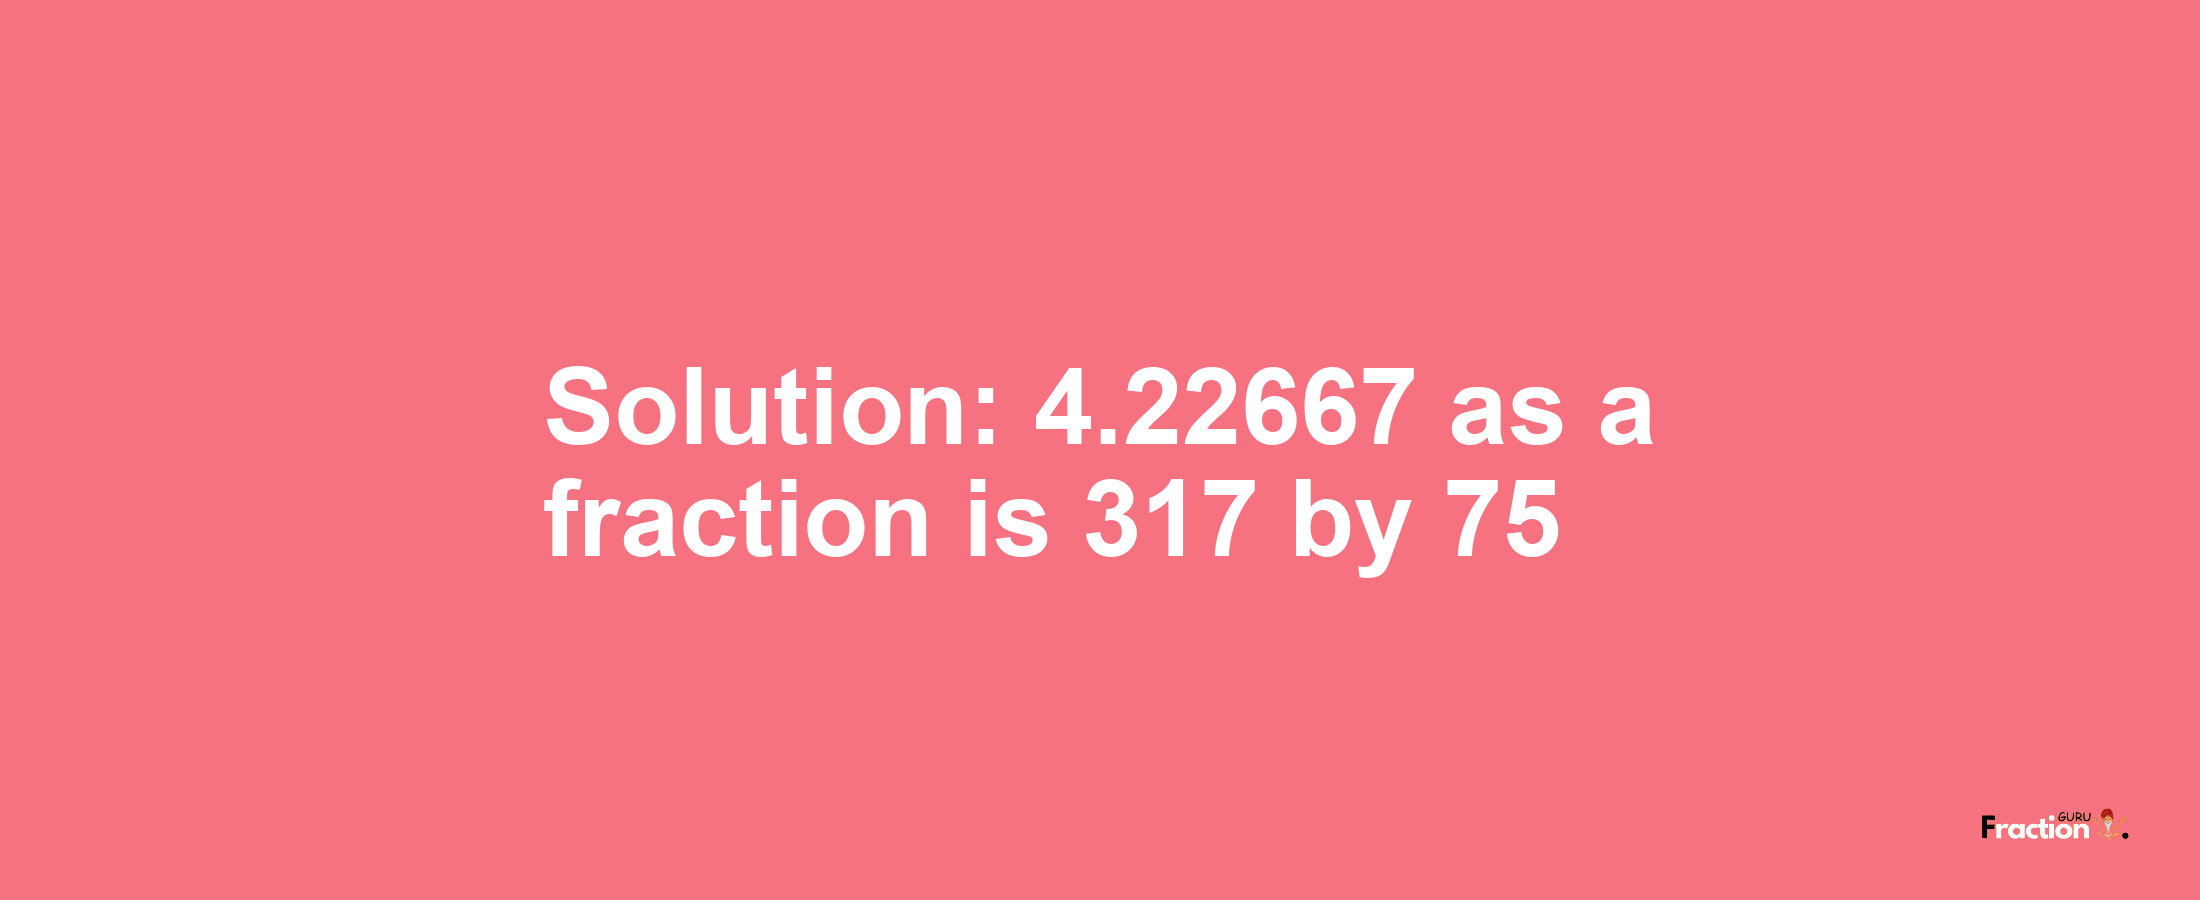 Solution:4.22667 as a fraction is 317/75